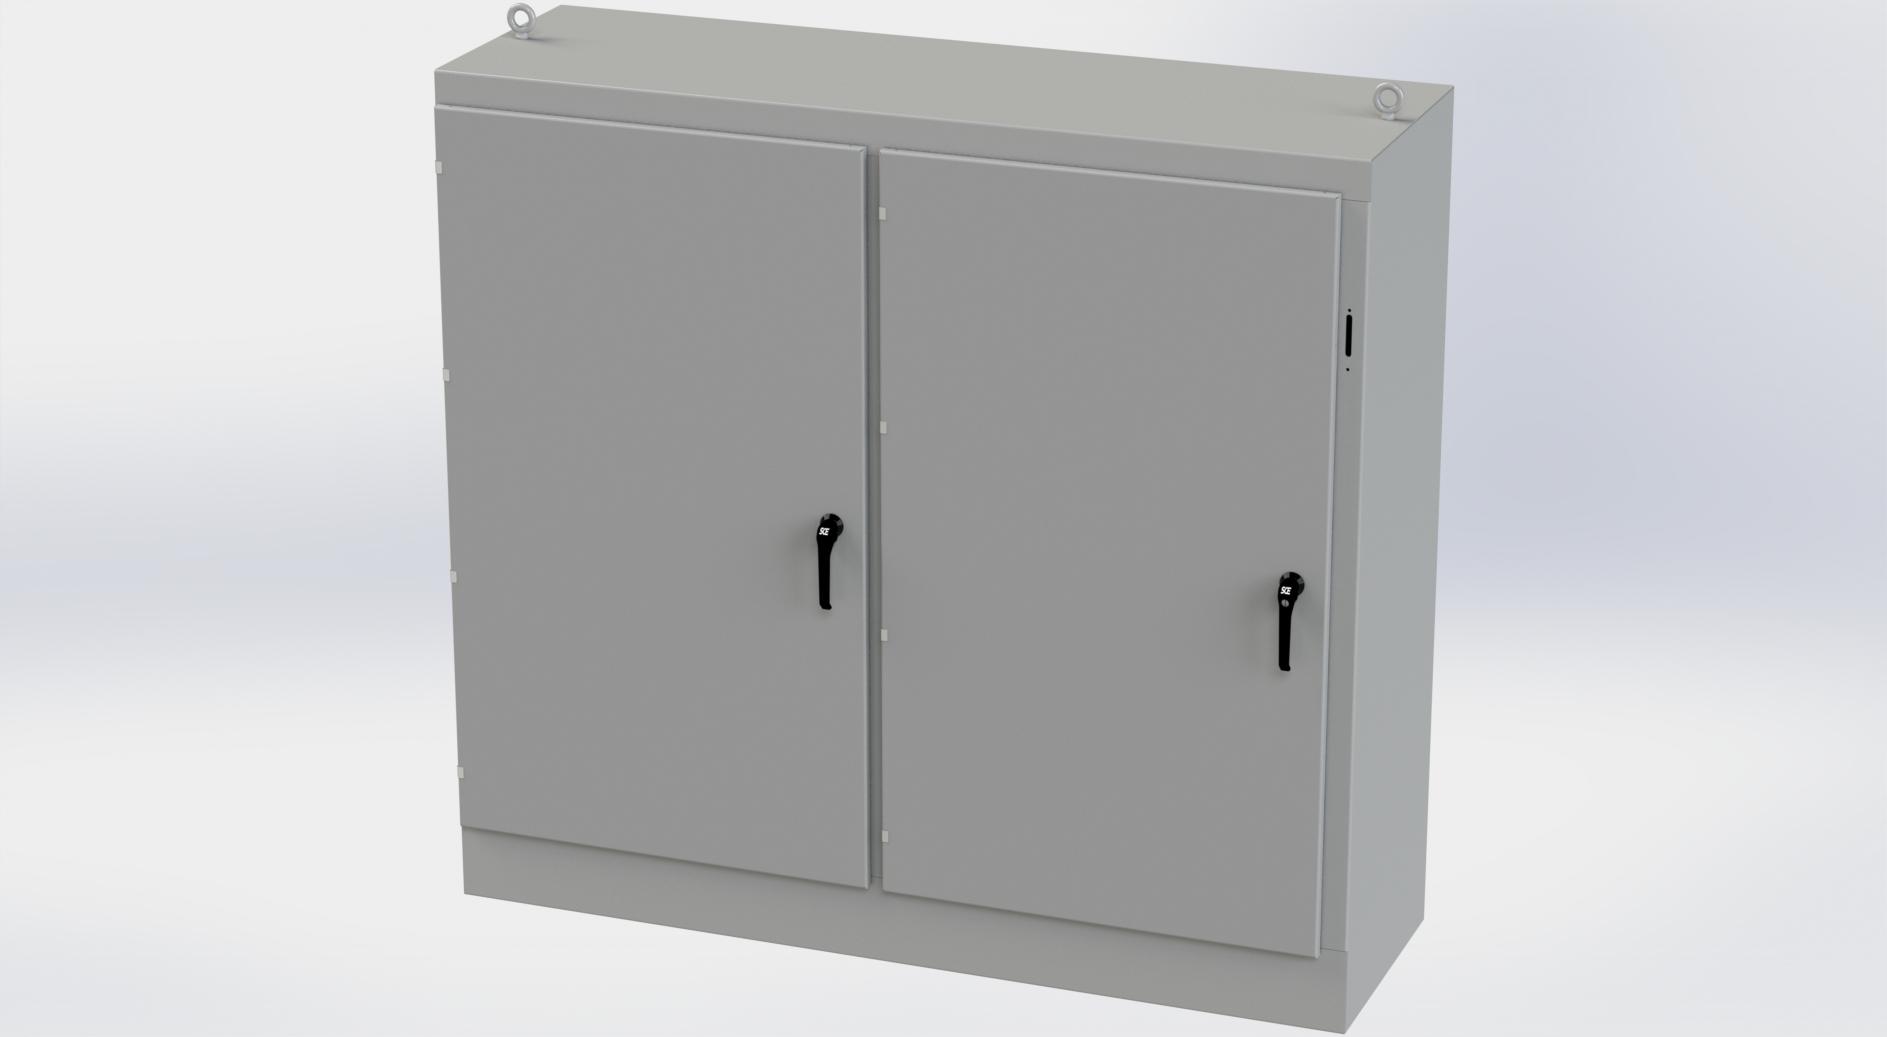 Saginaw Control SCE-72XM7824 2DR XM Enclosure, Height:72.00", Width:77.75", Depth:24.00", ANSI-61 gray powder coating inside and out. Sub-panels are powder coated white.